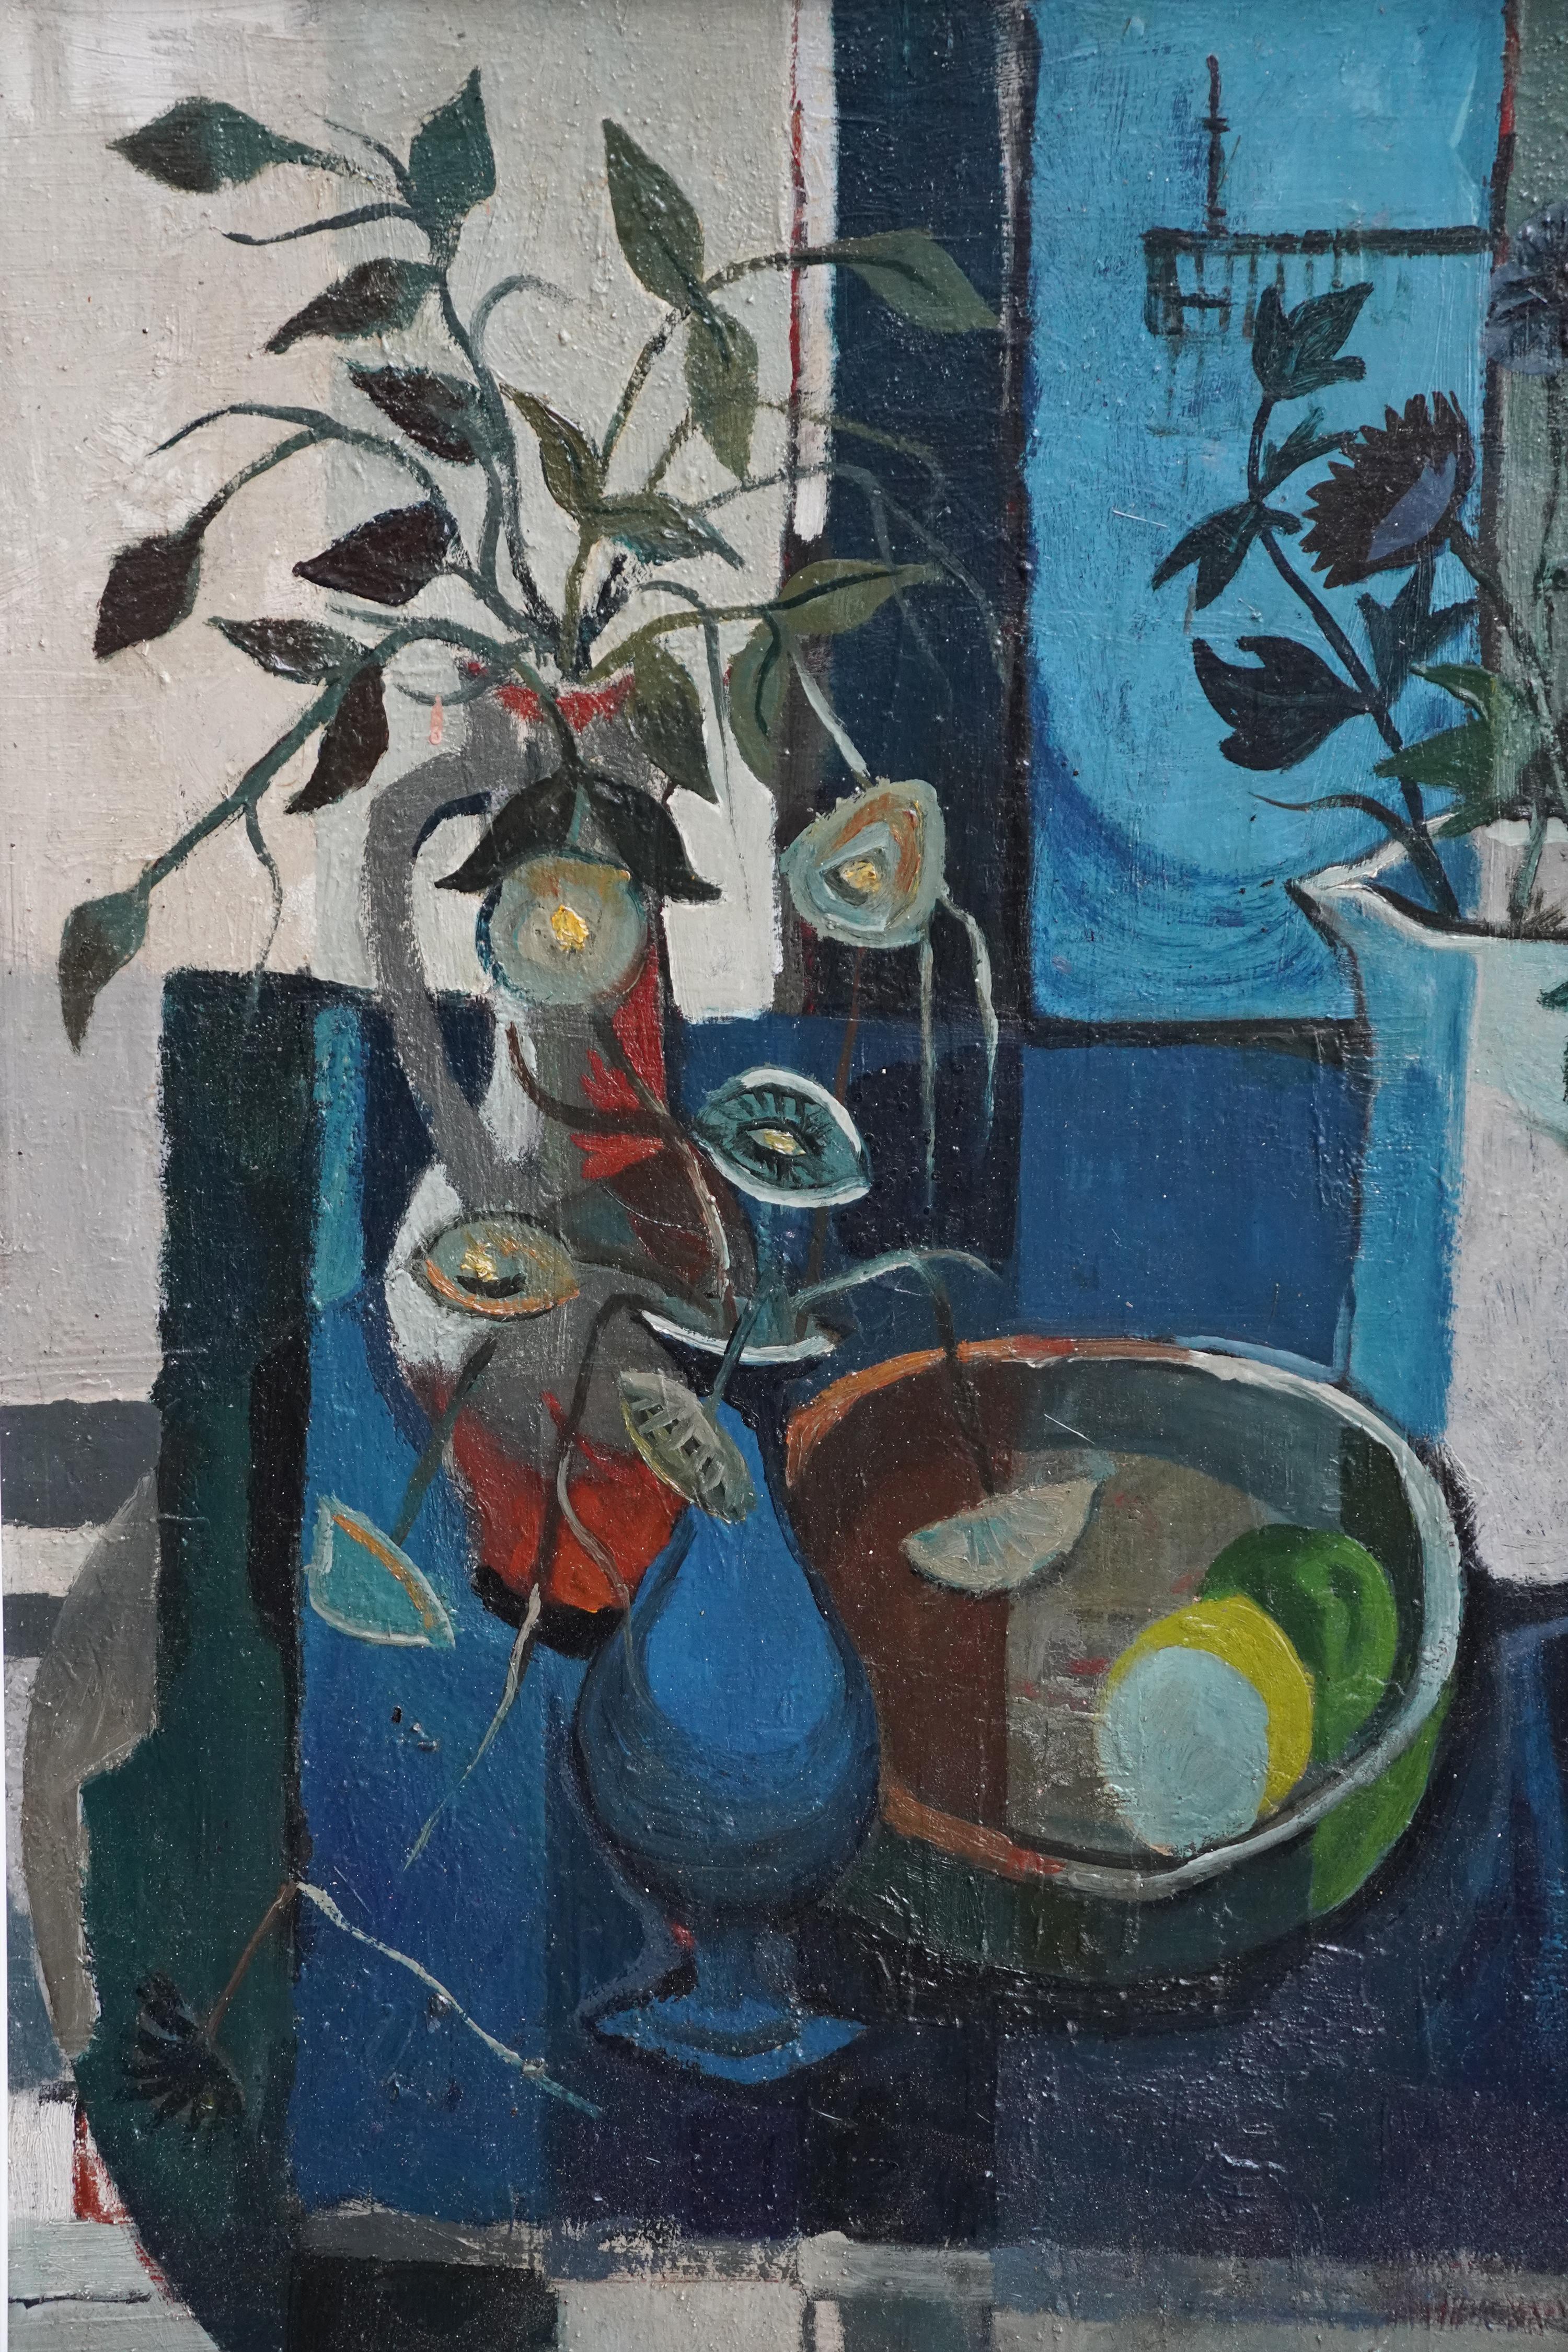 Gordon Wylie, Scottish artist painted this wonderful still life oil painting. Painted circa late 1950's it is a still life of three vases on a table with a bowl of lemon and lime. The painting has an abstract Cubist feel to it with blocks of colour